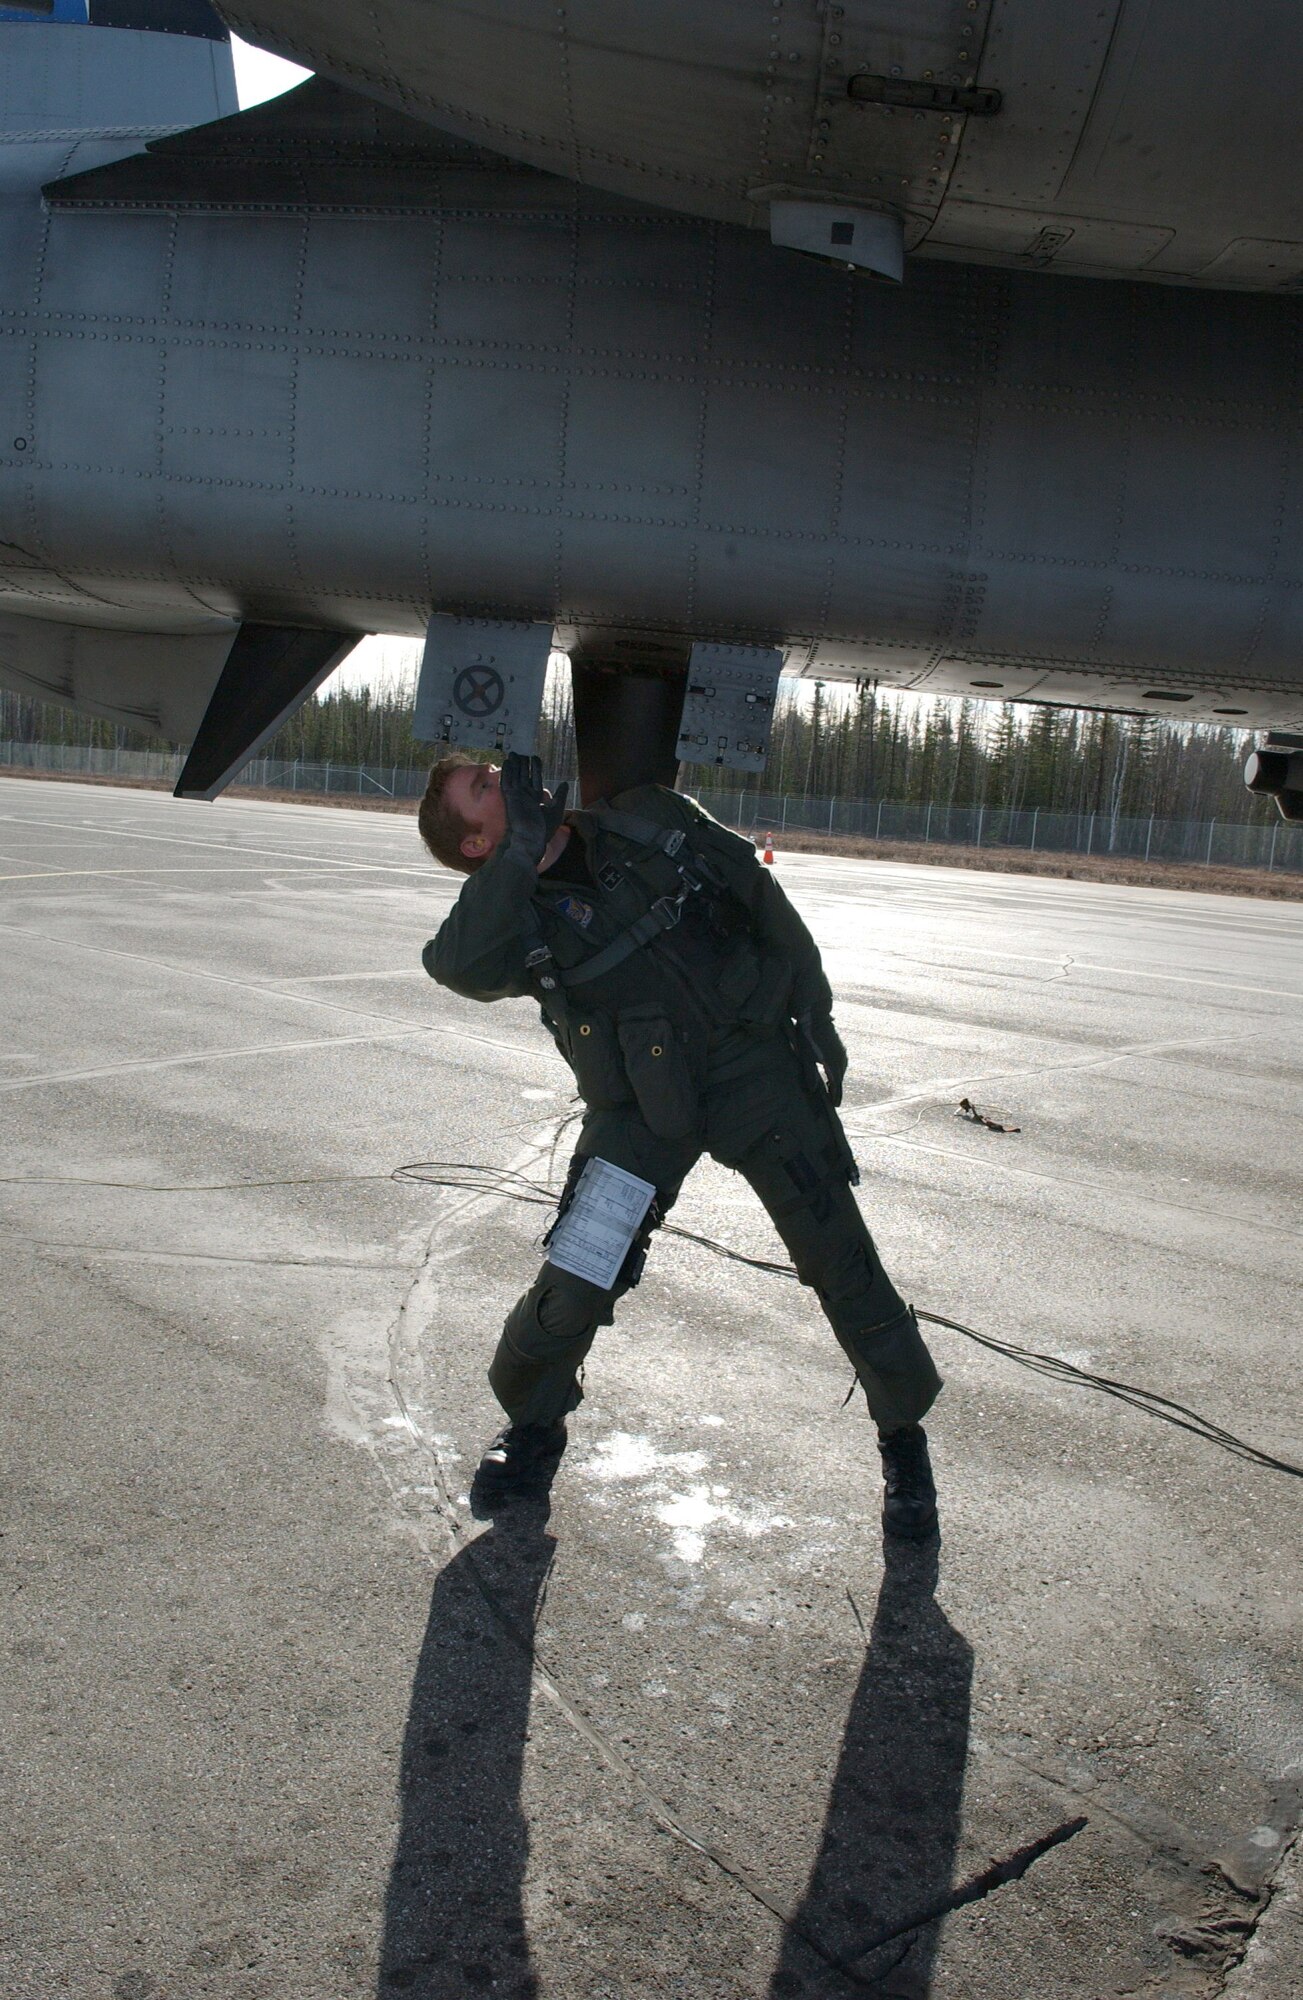 EIELSON AIR FORCE BASE, Alaska - Captain Will Reynolds (Neo), 355th Fighter Squadron, conducts a pre-flight inspection on an A/OA-10 Thunderbolt II on April 24. Due to the Base Realignment and Closure list the A-10 Thunderbolt II is being relocated to Moody AFB, Georgia. (U.S. Air Force Photo by Airman 1st Class Christopher Griffin)